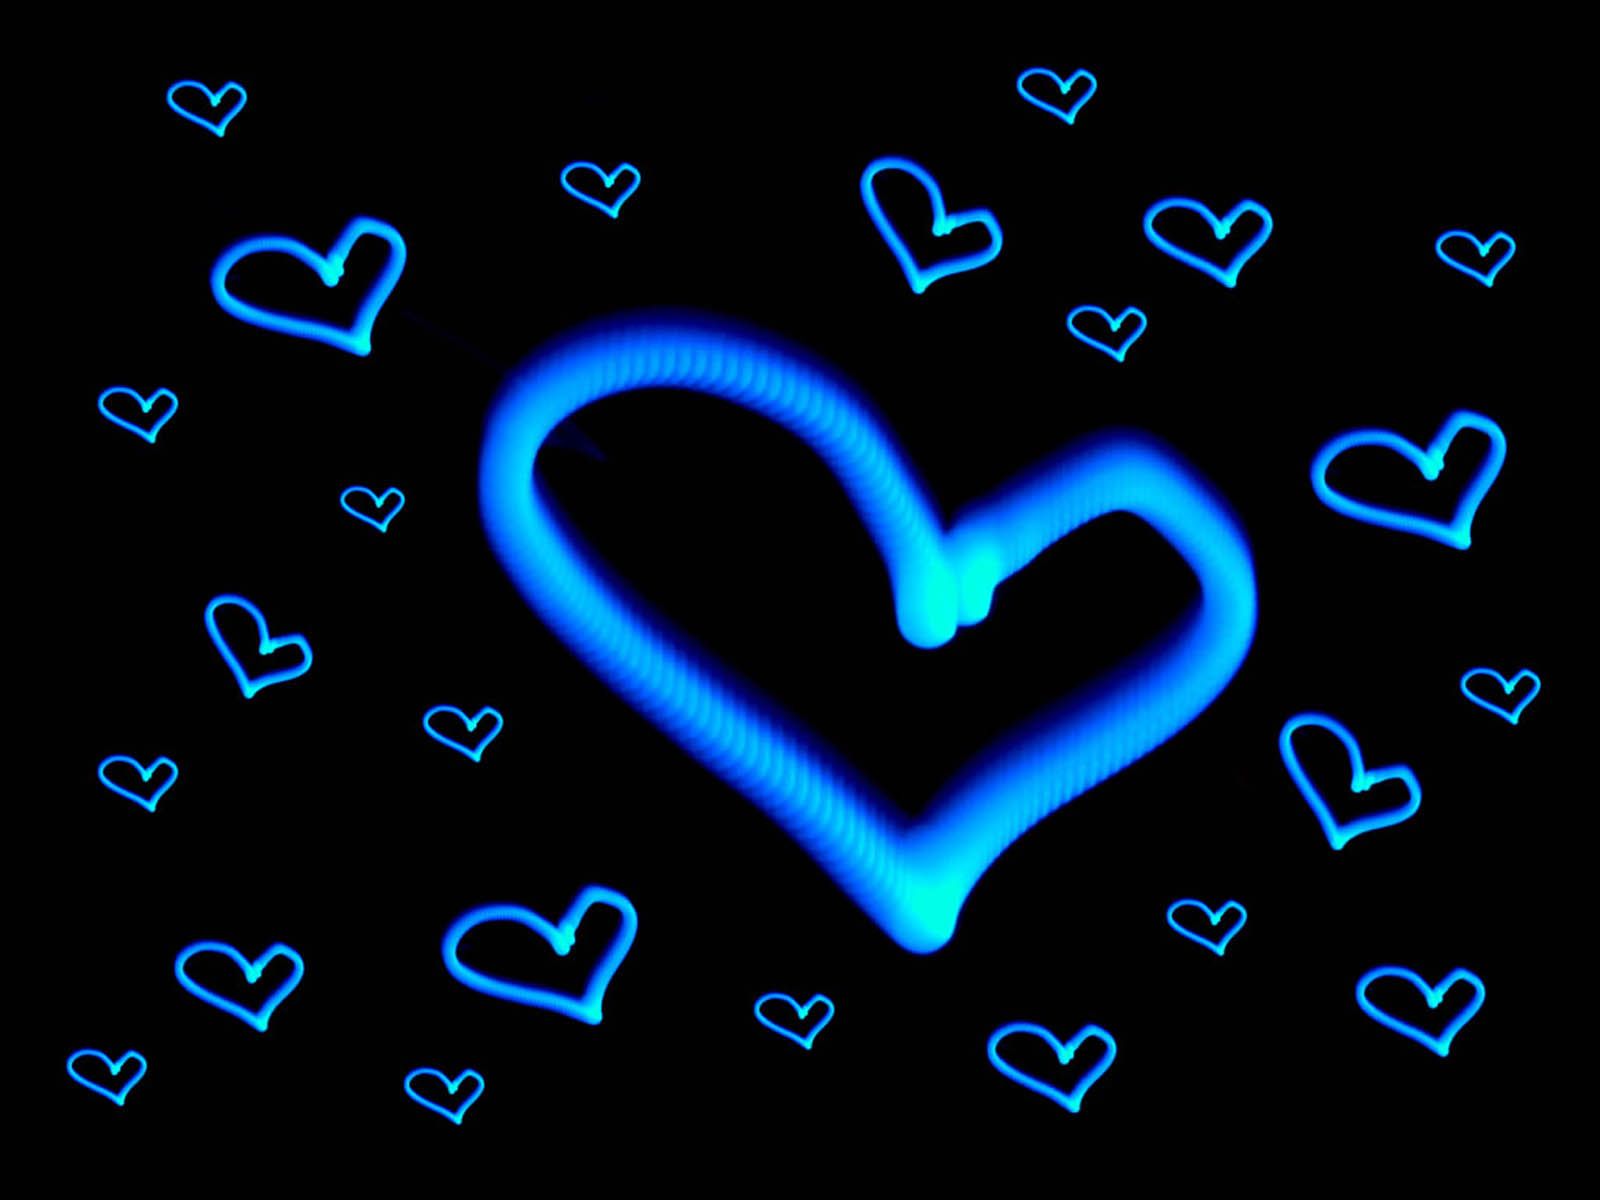 Blue Heart Wallpaper & Background Beautiful Best Available For Download Blue Heart Photo Free On Zicxa.com Image